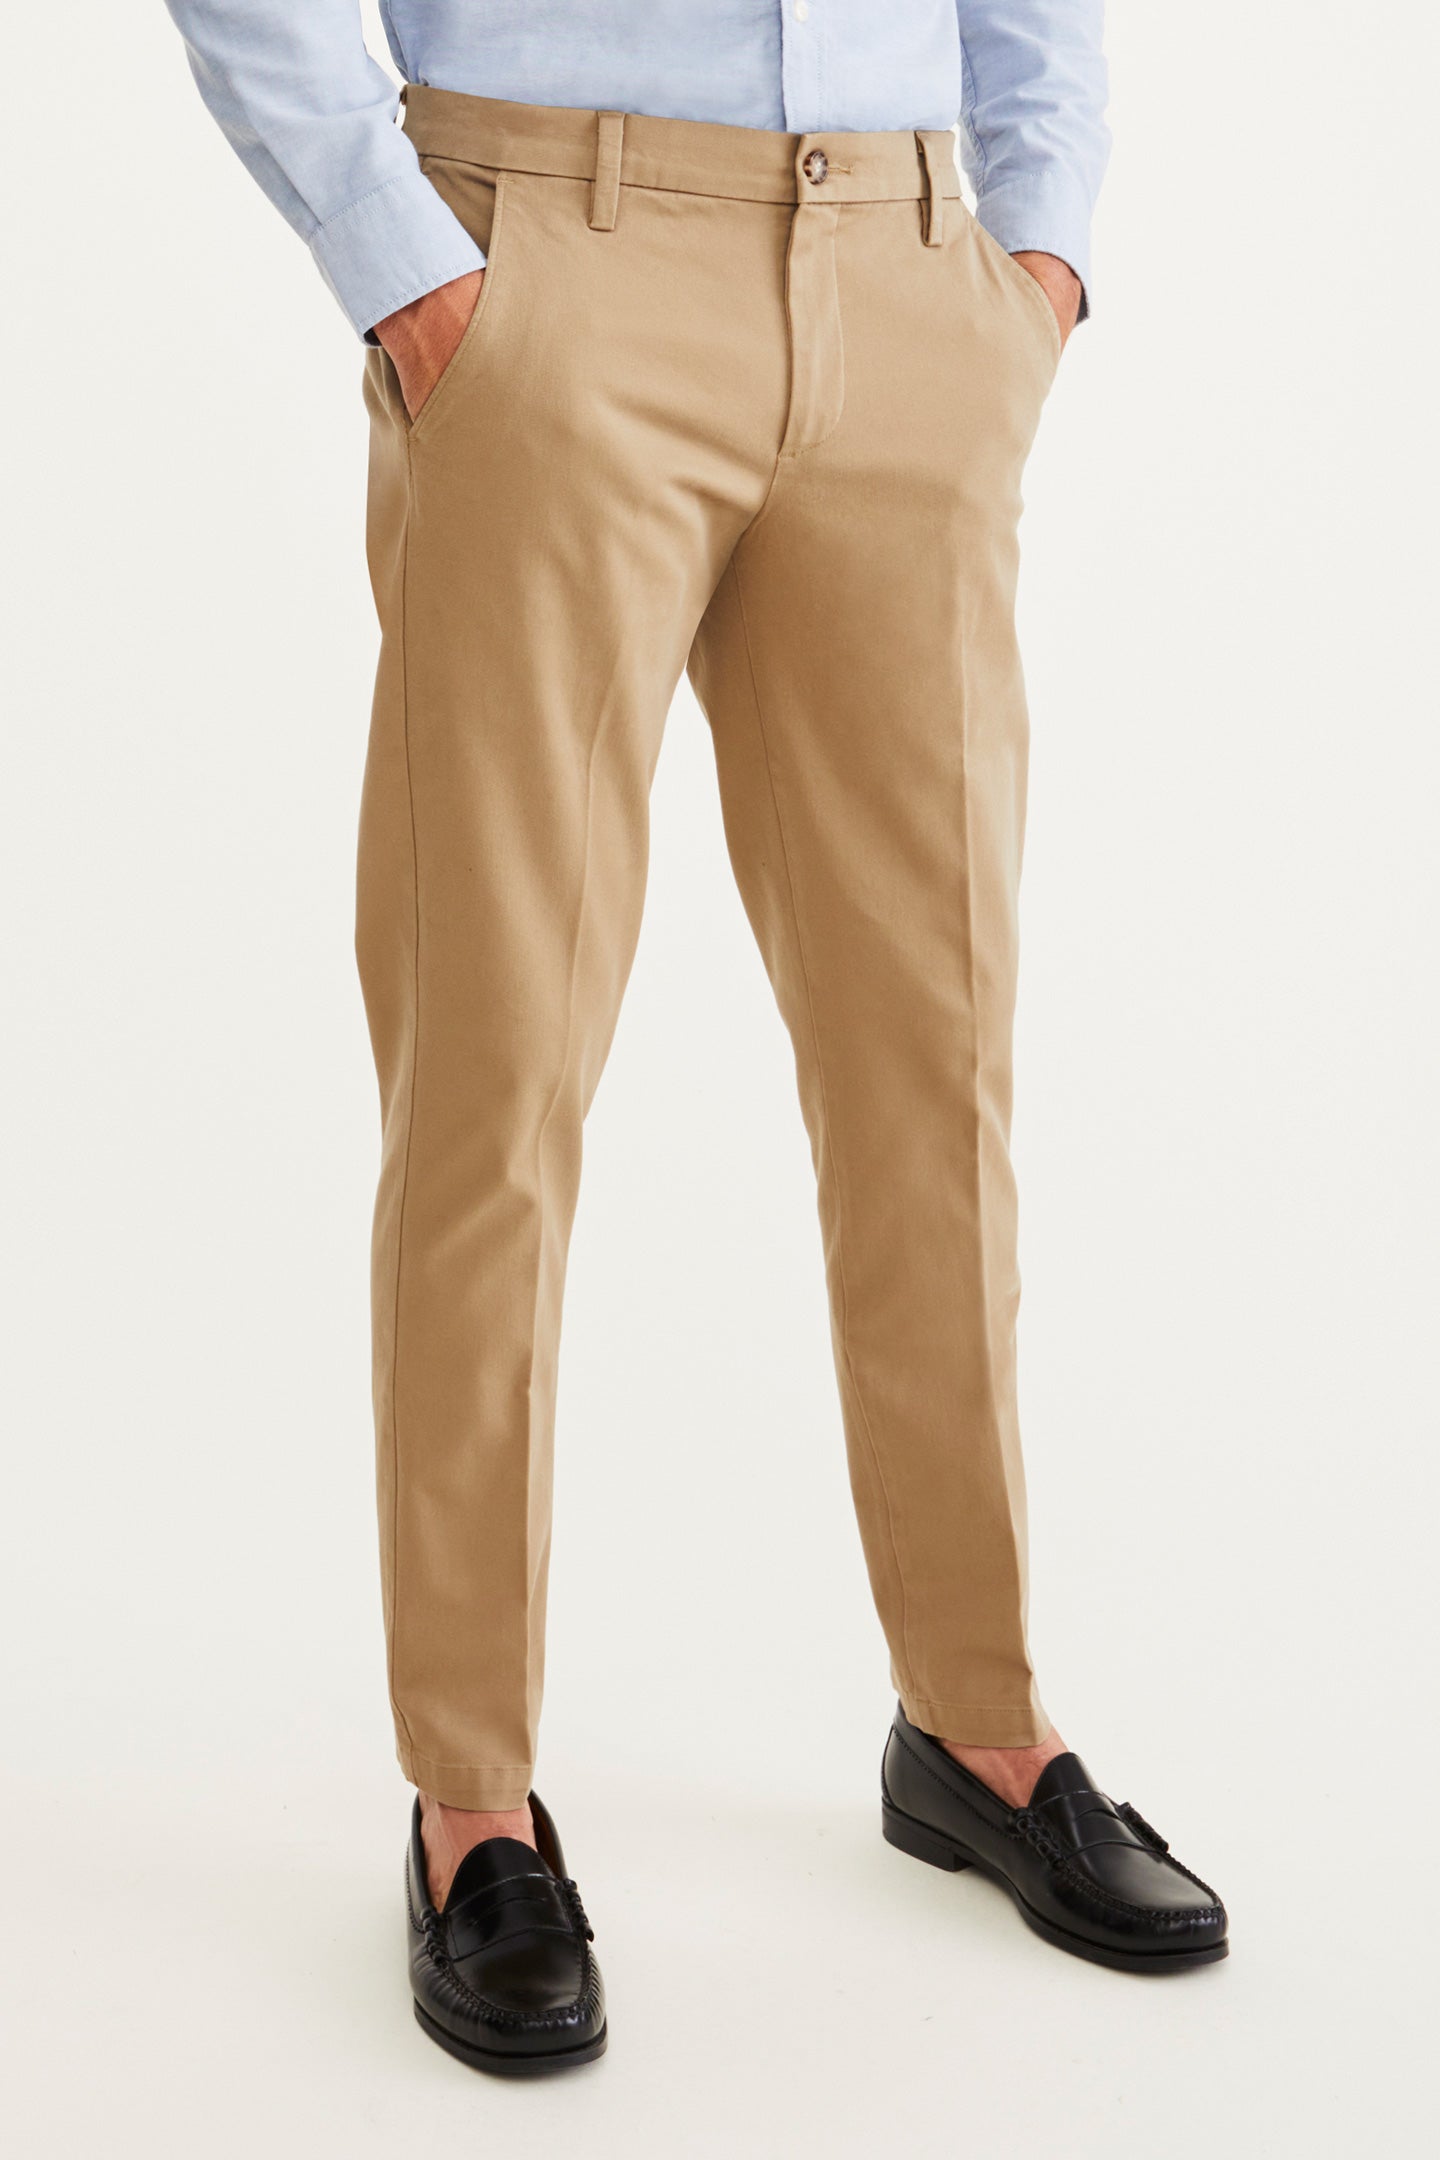 Slim Ultimate Built-In Flex Textured Chino Pants for Men | Old Navy